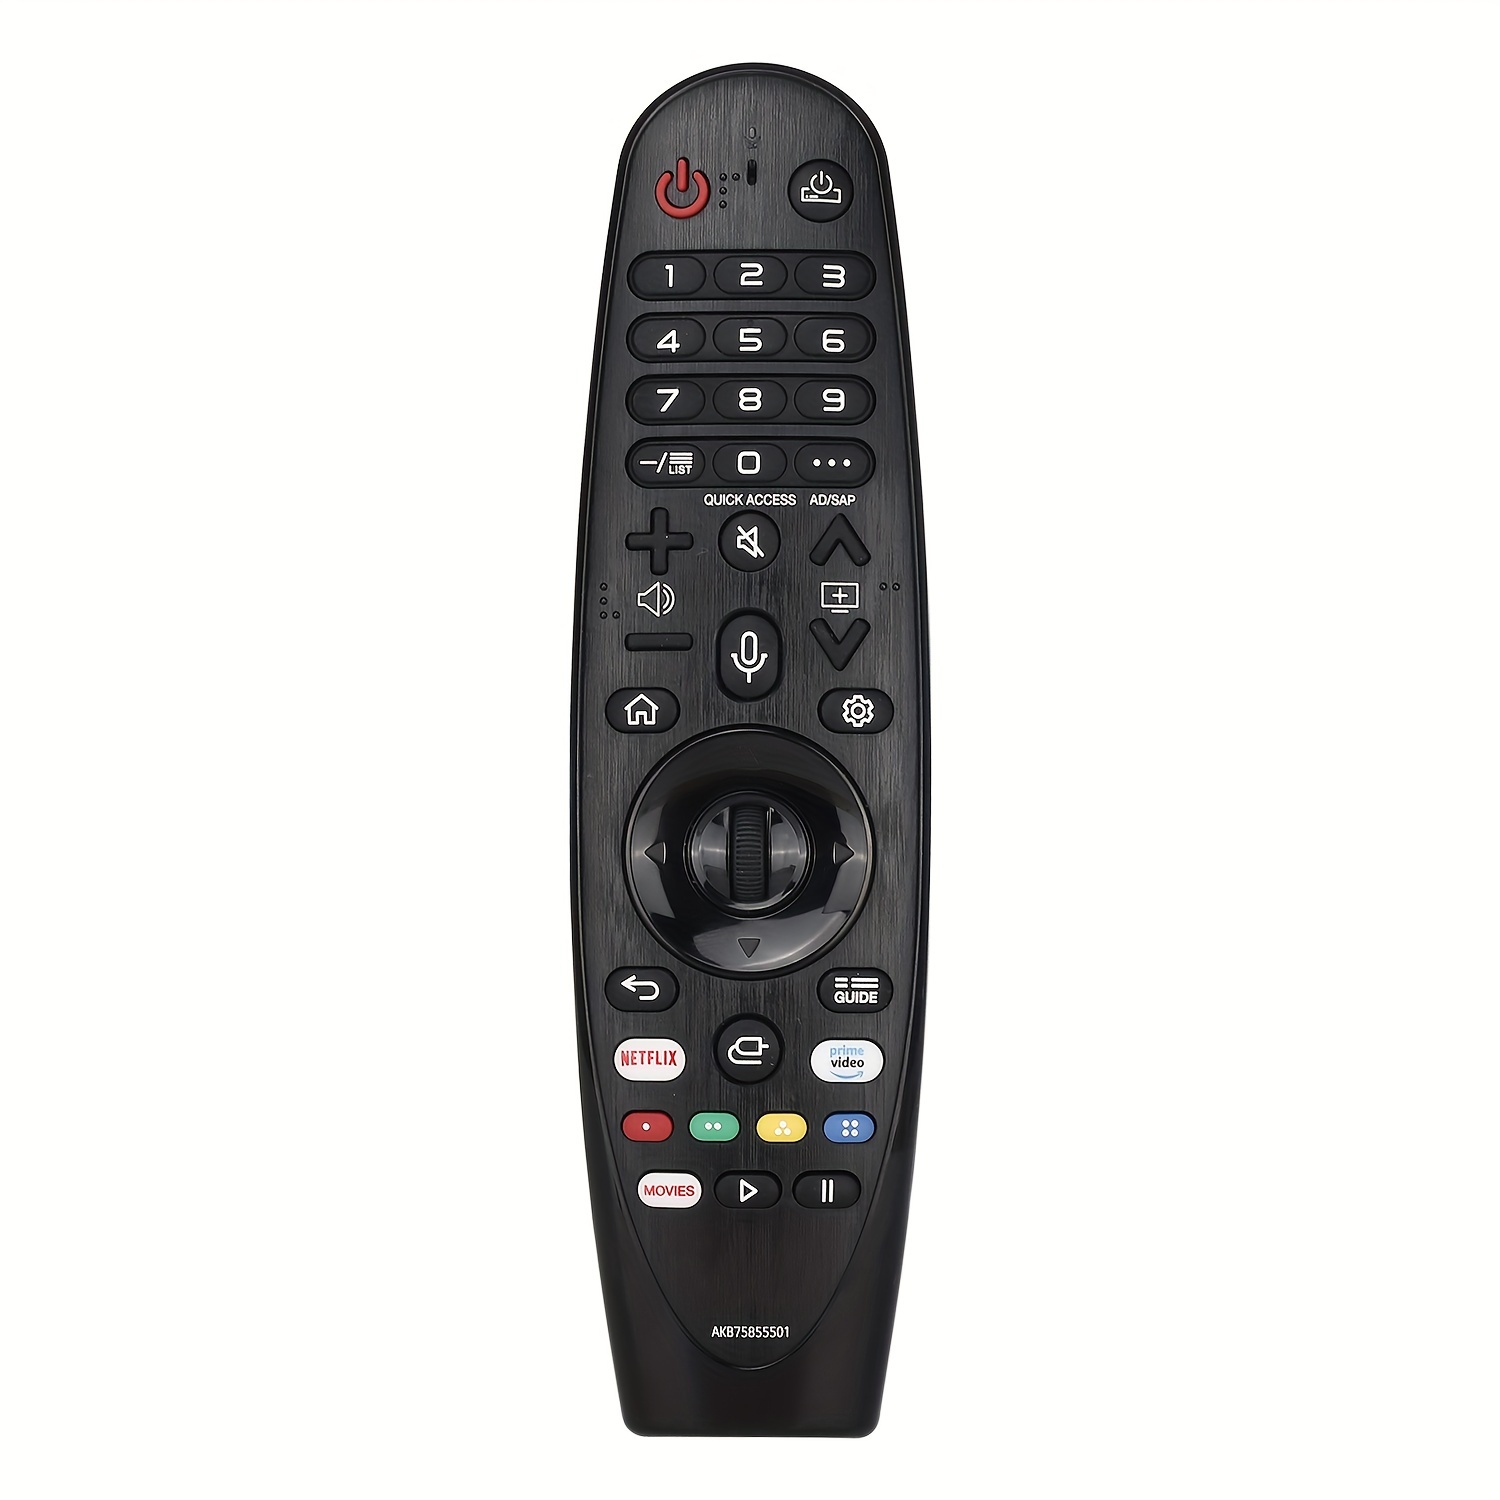 Lg magic remote • Compare (6 products) see prices »